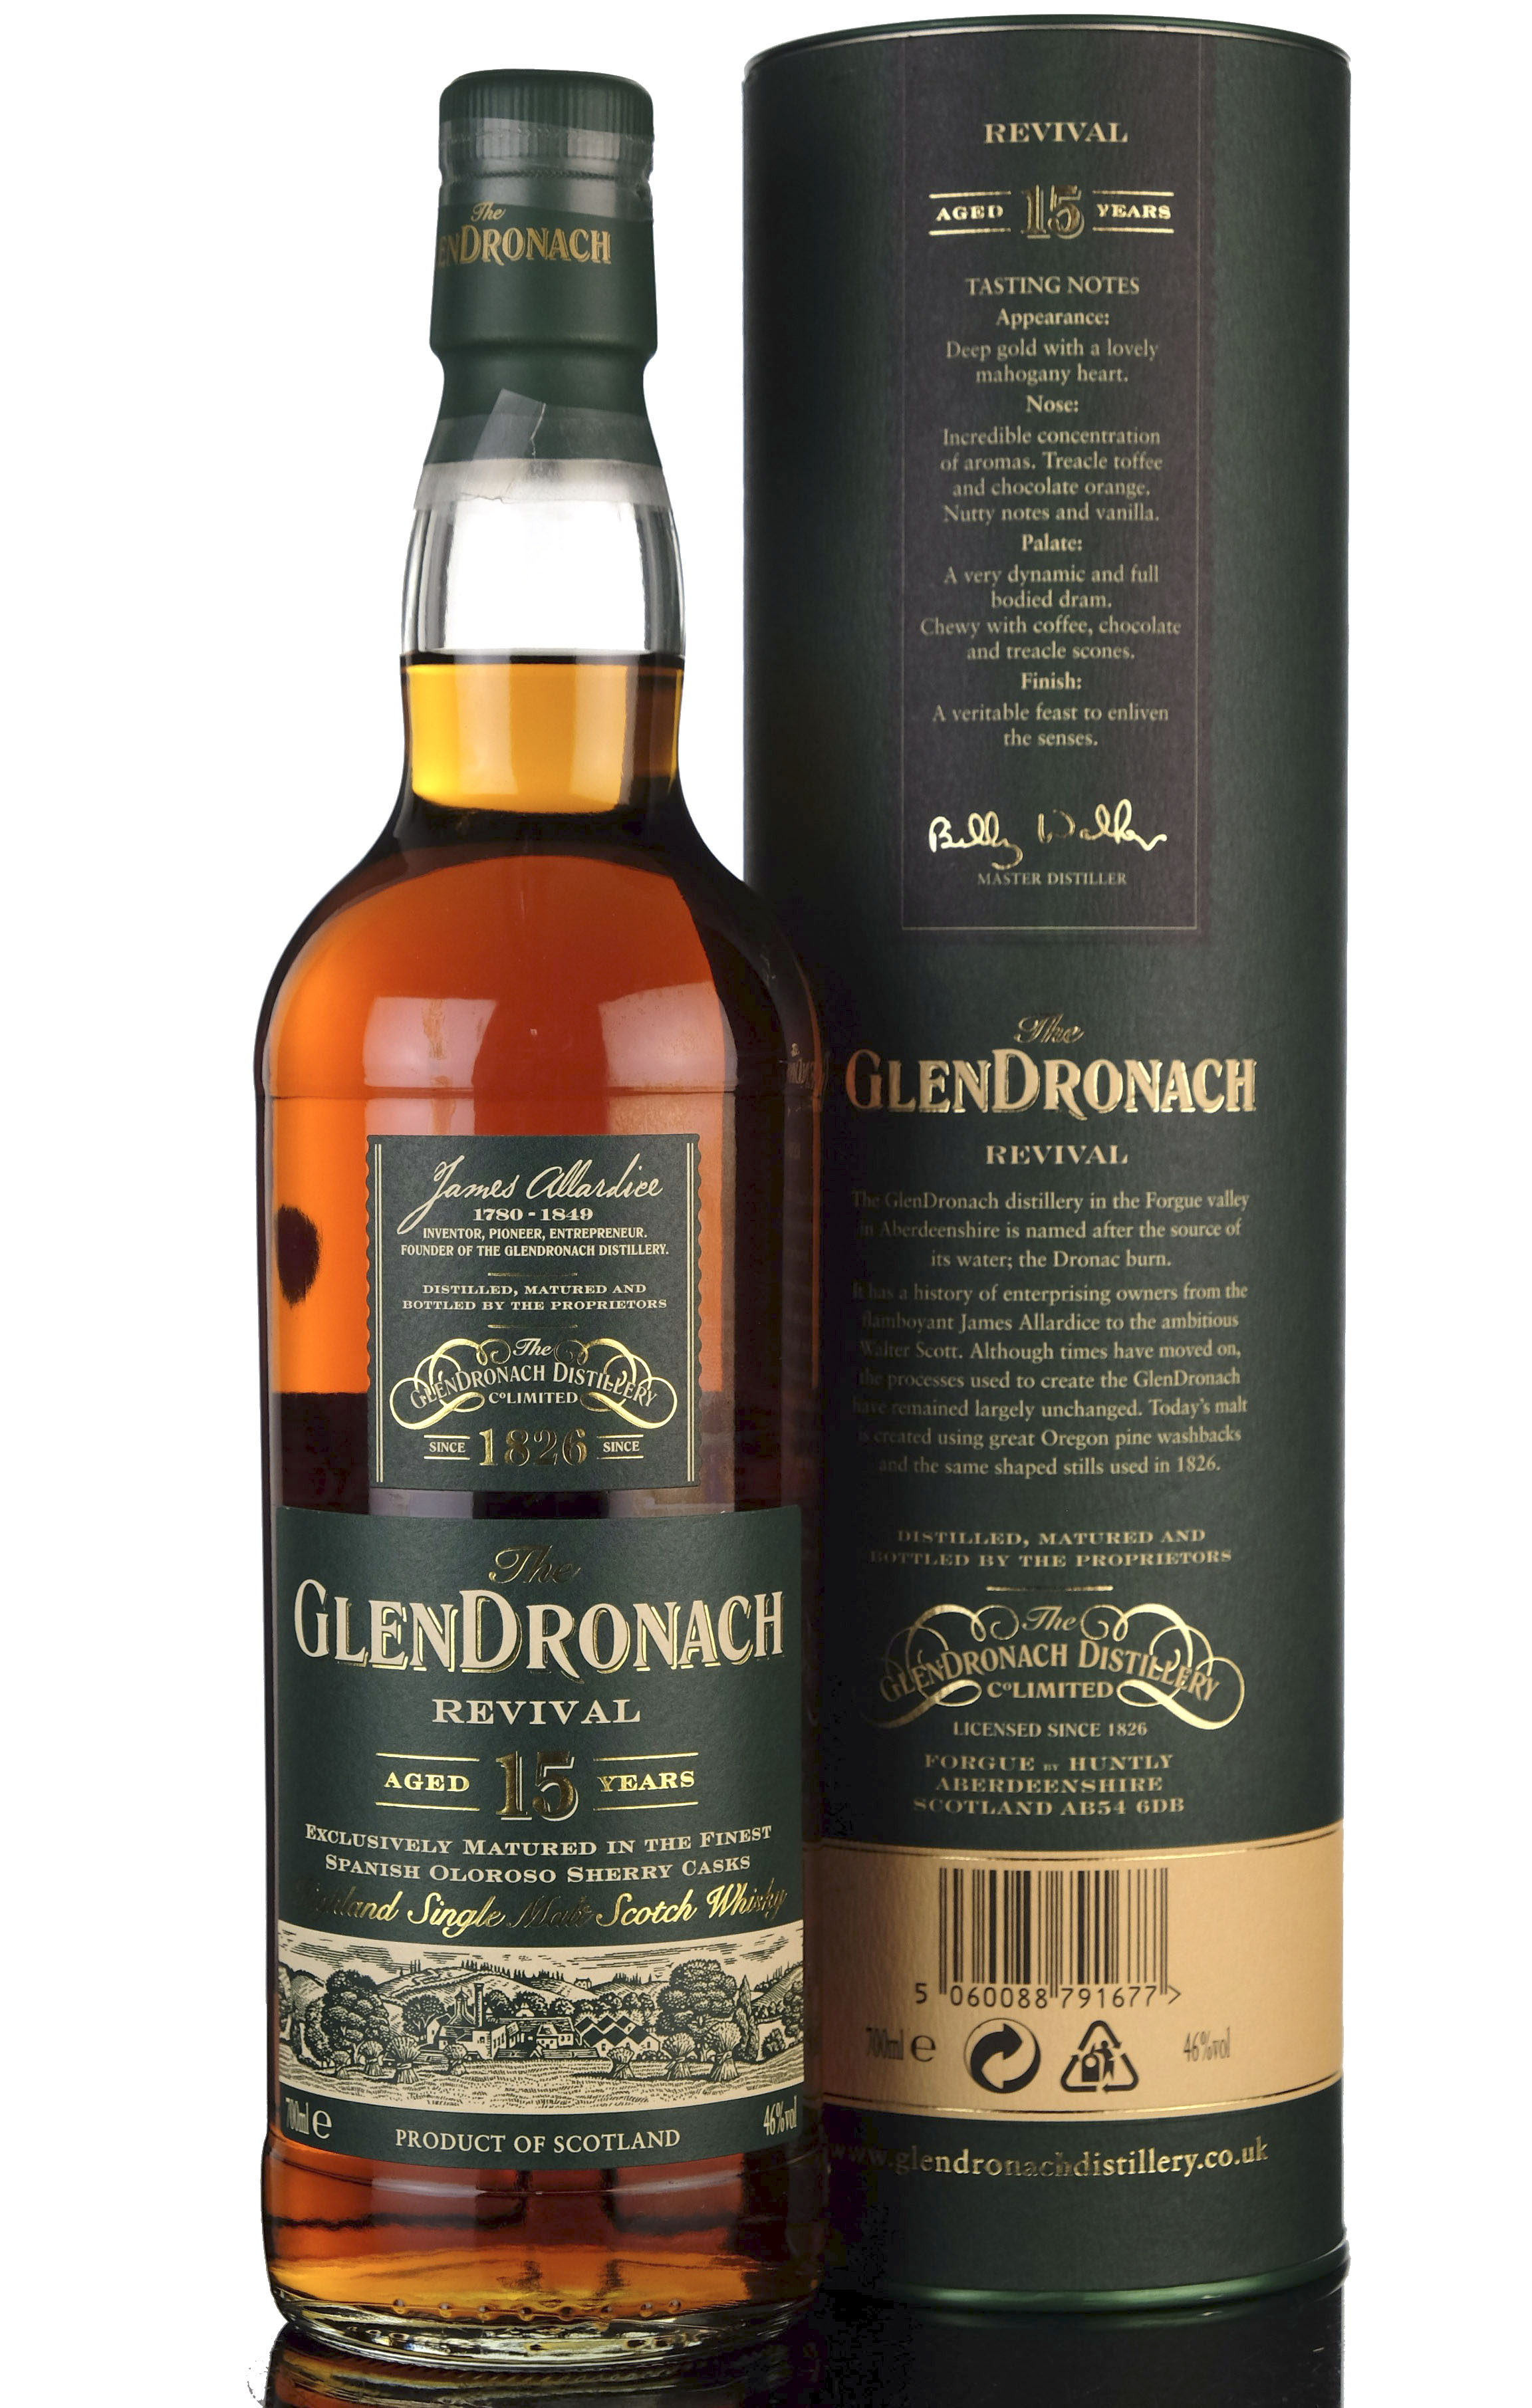 Glendronach 15 Year Old - Revival